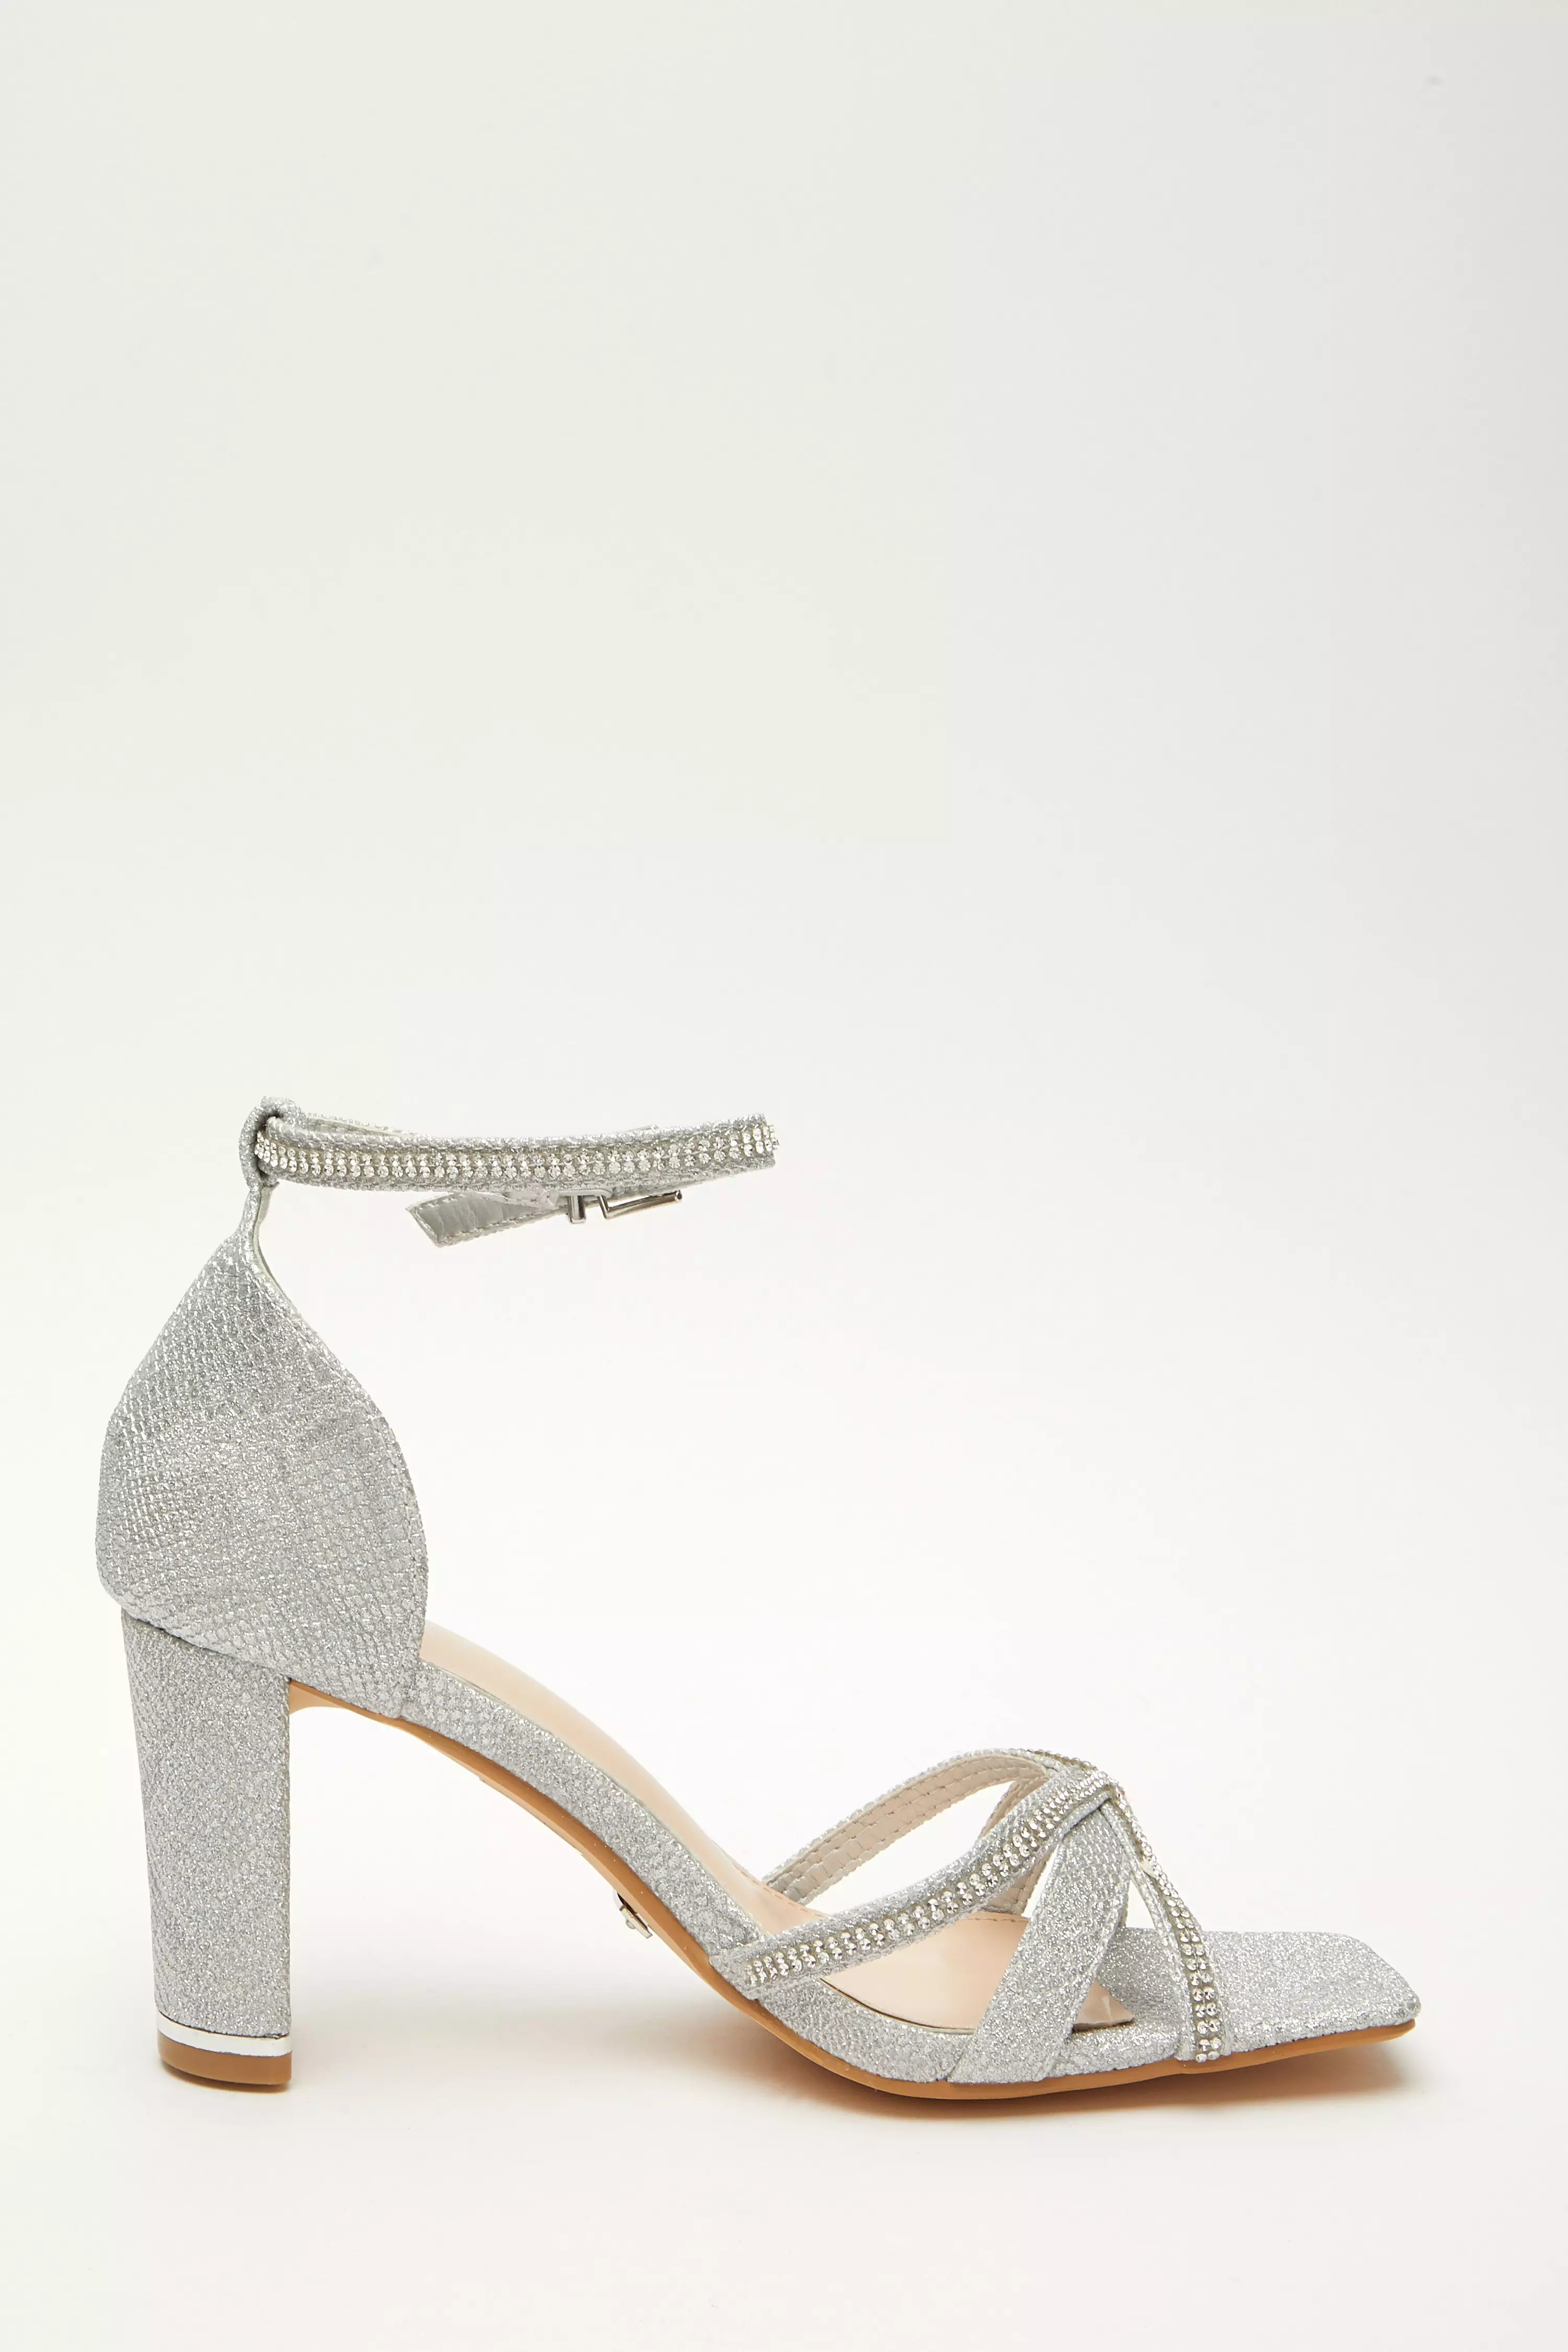 Silver Shimmer Cross Strap Heeled Sandals - QUIZ Clothing